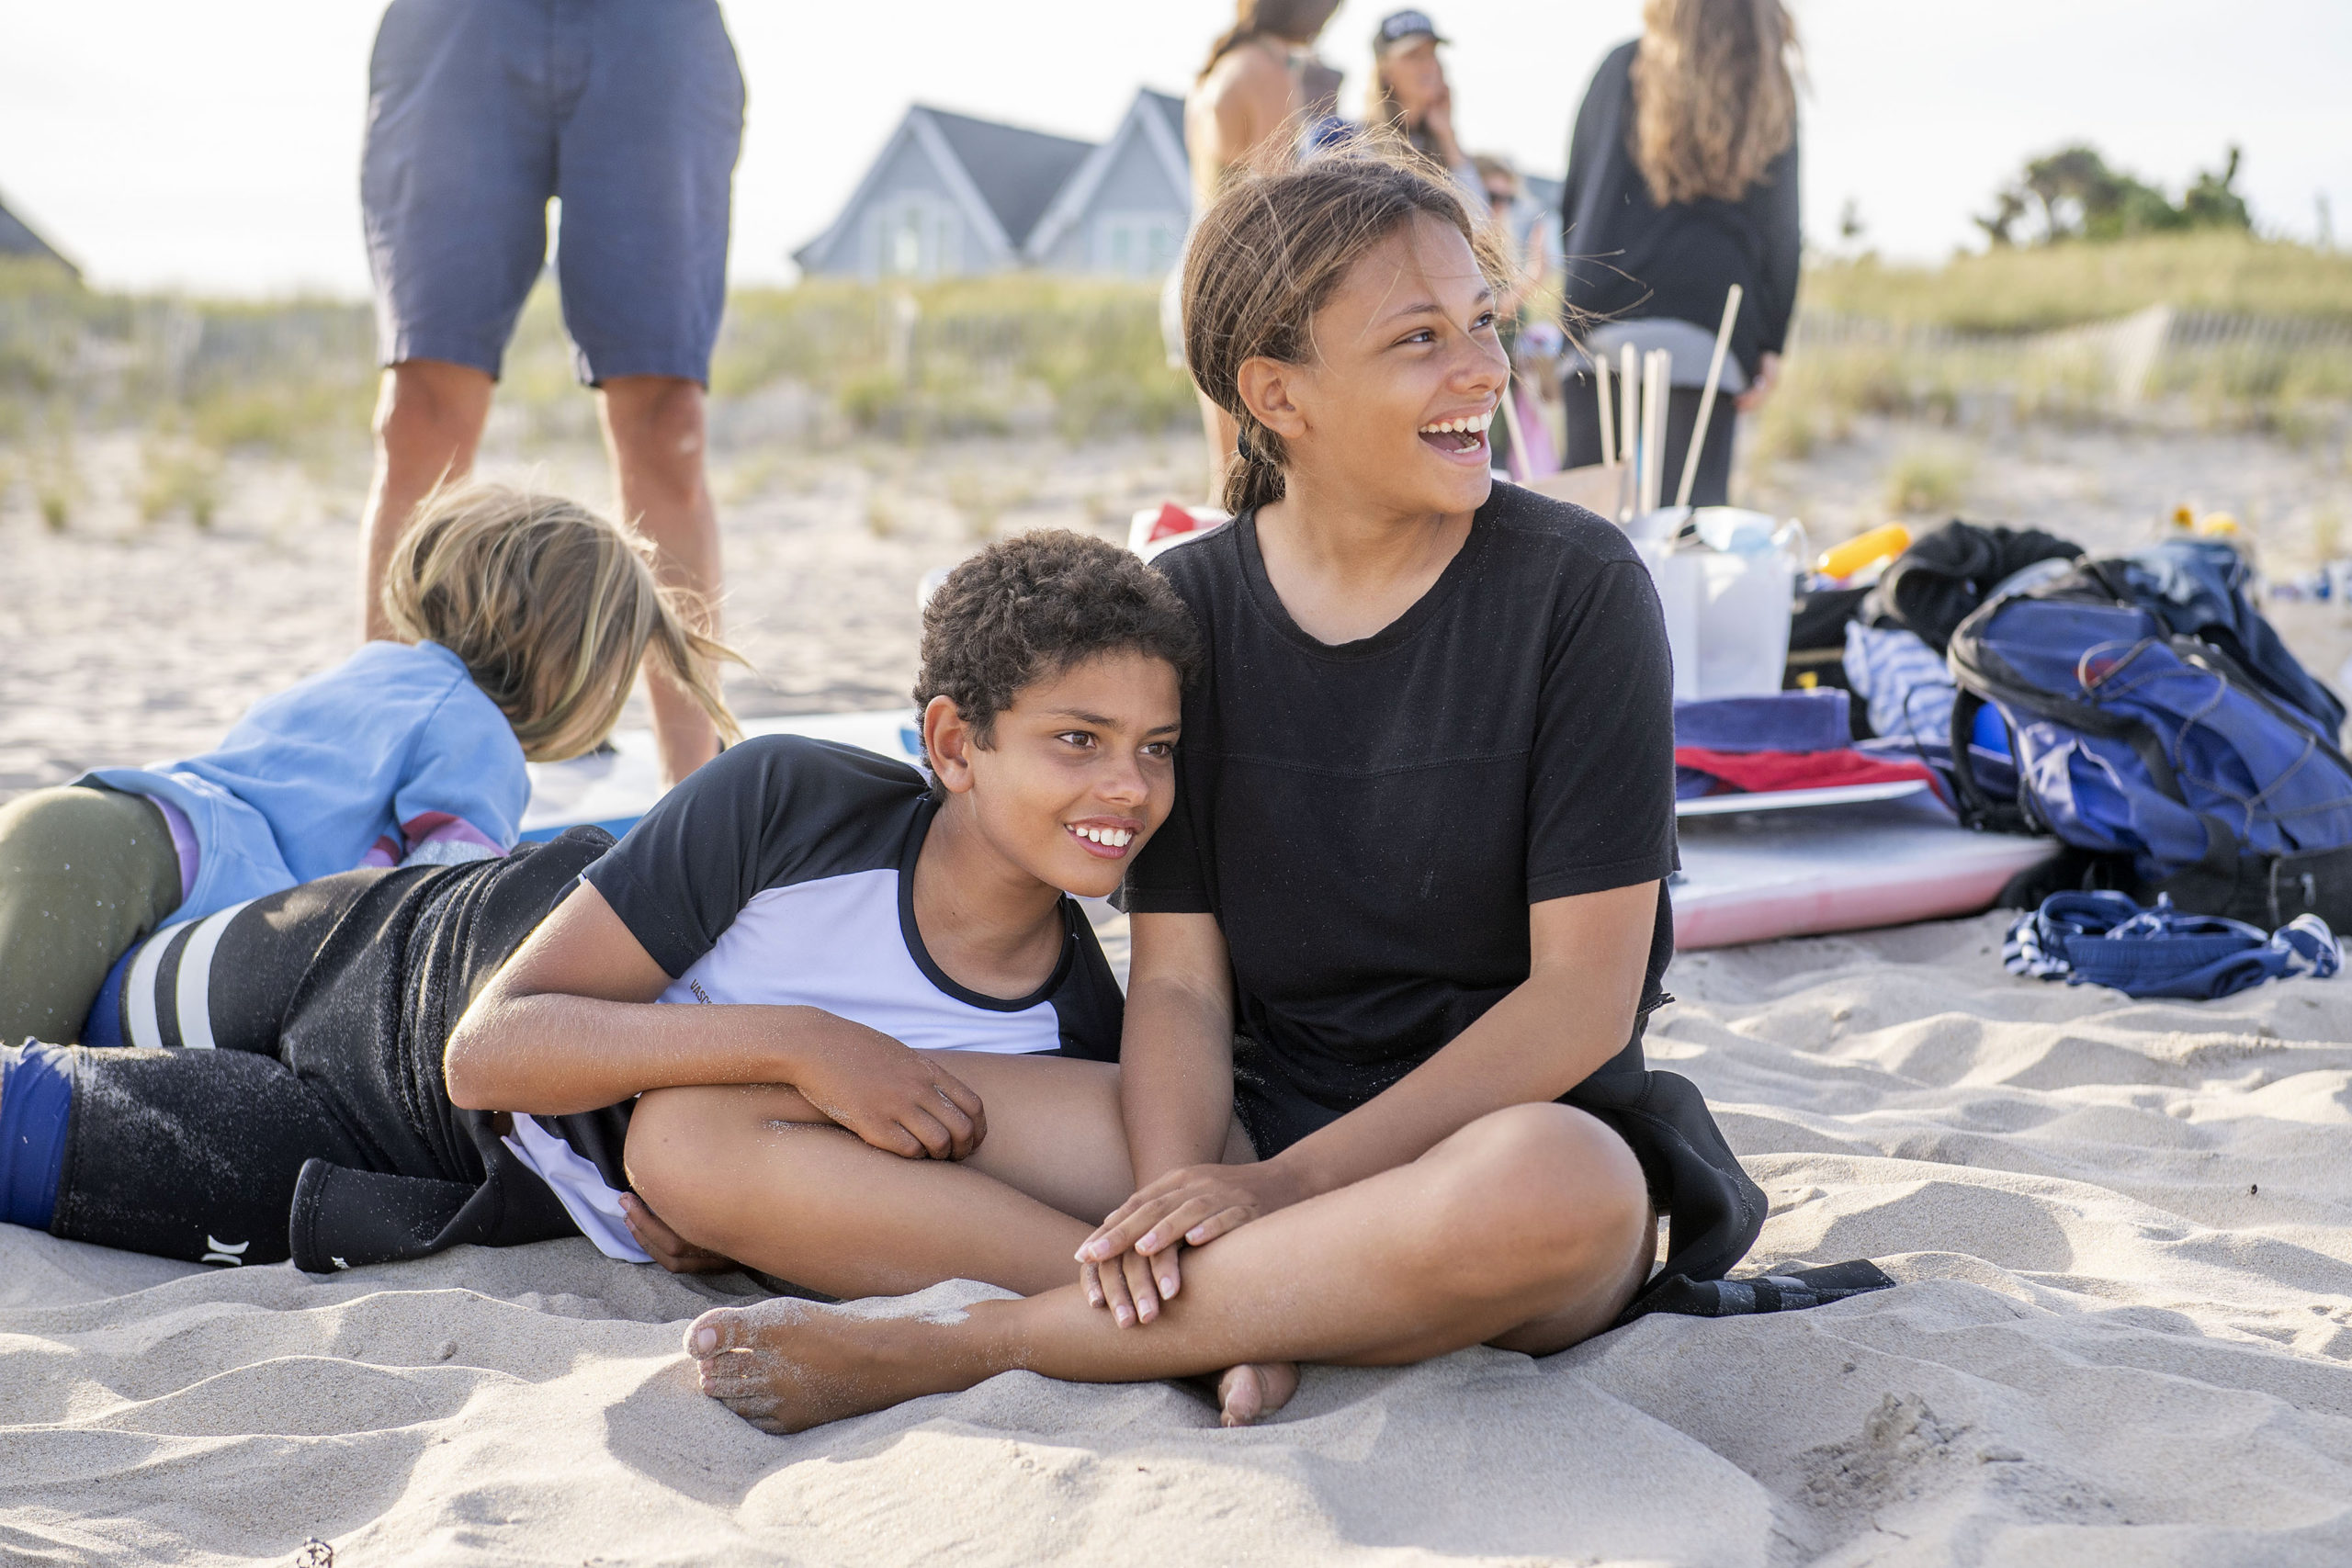 Siblings and event organizers Kilian and Sophia Cosmina Ruckriegel prior to the start of the Paddle Out in Solidarity event in support of the Black Lives Matter movement on the beach at the end of Napeague Lane in Amagansett on Wednesday, August 26.  MICHAEL HELLER